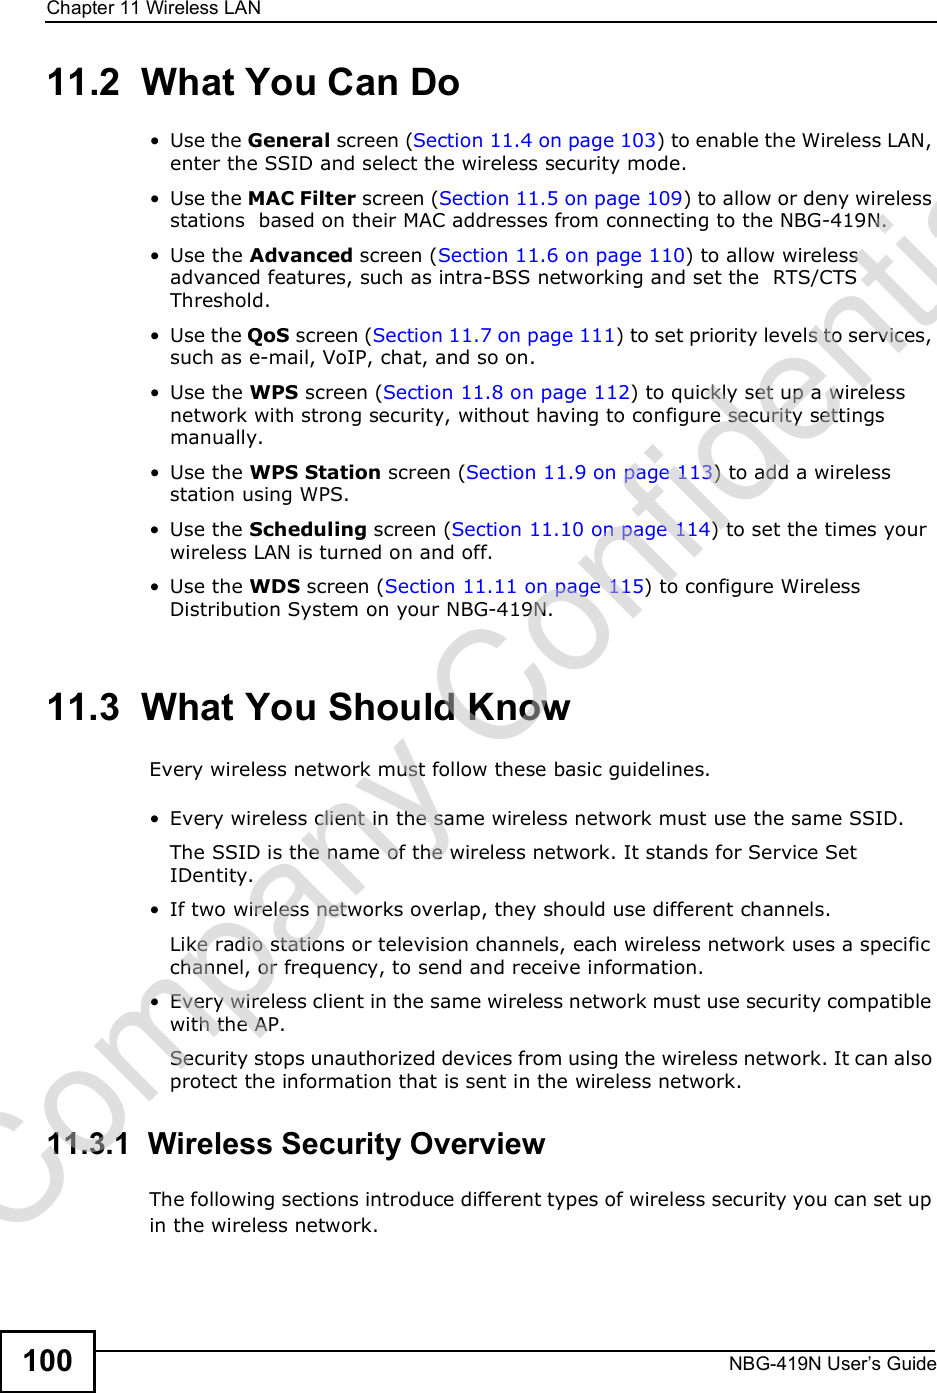 Chapter 11Wireless LANNBG-419N User s Guide10011.2  What You Can Do Use the General screen (Section 11.4 on page 103) to enable the Wireless LAN, enter the SSID and select the wireless security mode. Use the MAC Filter screen (Section 11.5 on page 109) to allow or deny wireless stations  based on their MAC addresses from connecting to the NBG-419N. Use the Advanced screen (Section 11.6 on page 110) to allow wireless advanced features, such as intra-BSS networking and set the  RTS/CTS Threshold. Use the QoS screen (Section 11.7 on page 111) to set priority levels to services, such as e-mail, VoIP, chat, and so on. Use the WPS screen (Section 11.8 on page 112) to quickly set up a wireless network with strong security, without having to configure security settings manually. Use the WPS Station screen (Section 11.9 on page 113) to add a wireless station using WPS.  Use the Scheduling screen (Section 11.10 on page 114) to set the times your wireless LAN is turned on and off. Use the WDS screen (Section 11.11 on page 115) to configure Wireless Distribution System on your NBG-419N.11.3  What You Should KnowEvery wireless network must follow these basic guidelines. Every wireless client in the same wireless network must use the same SSID.The SSID is the name of the wireless network. It stands for Service Set IDentity. If two wireless networks overlap, they should use different channels.Like radio stations or television channels, each wireless network uses a specific channel, or frequency, to send and receive information. Every wireless client in the same wireless network must use security compatible with the AP.Security stops unauthorized devices from using the wireless network. It can also protect the information that is sent in the wireless network.11.3.1  Wireless Security OverviewThe following sections introduce different types of wireless security you can set up in the wireless network.Company Confidential